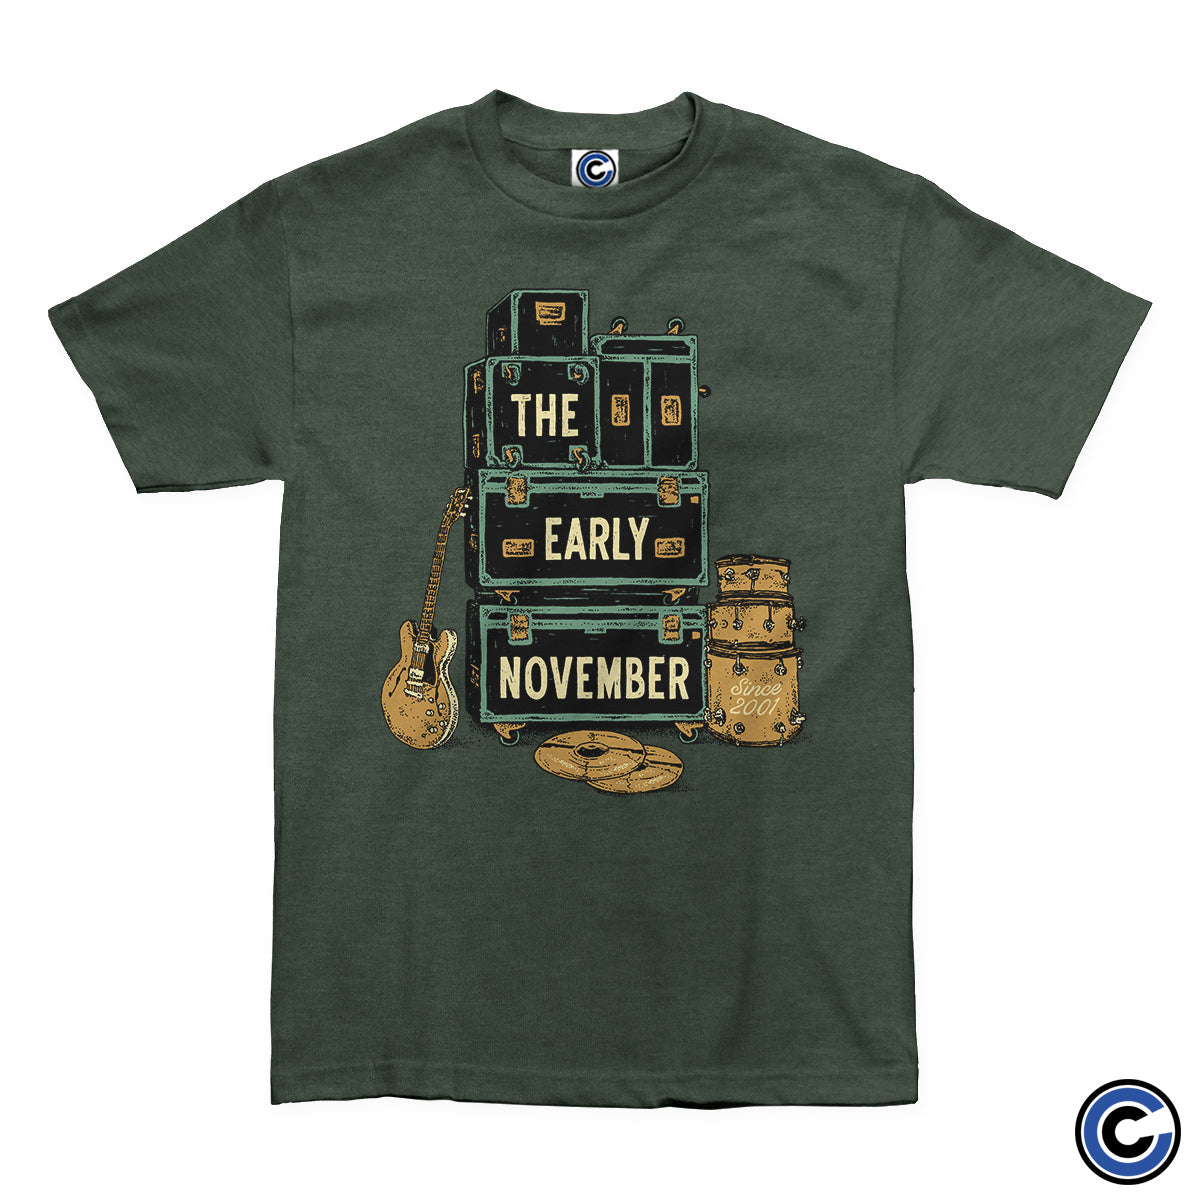 The Early November "Road Case" Shirt